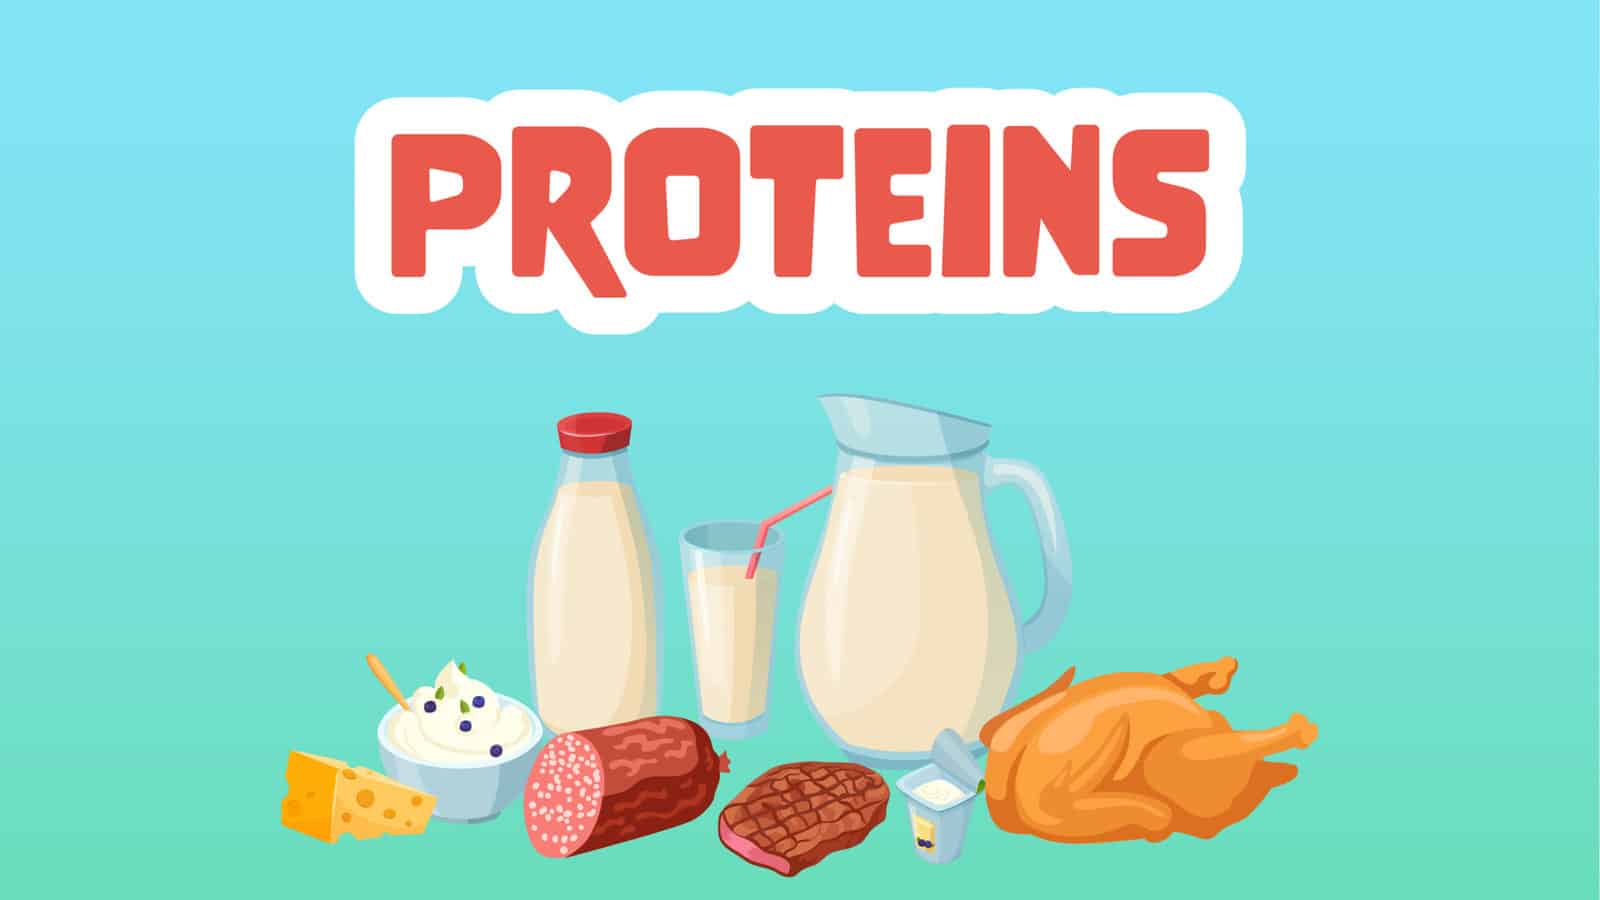 Proteins Facts for Kids – 5 Powerful Facts about Proteins